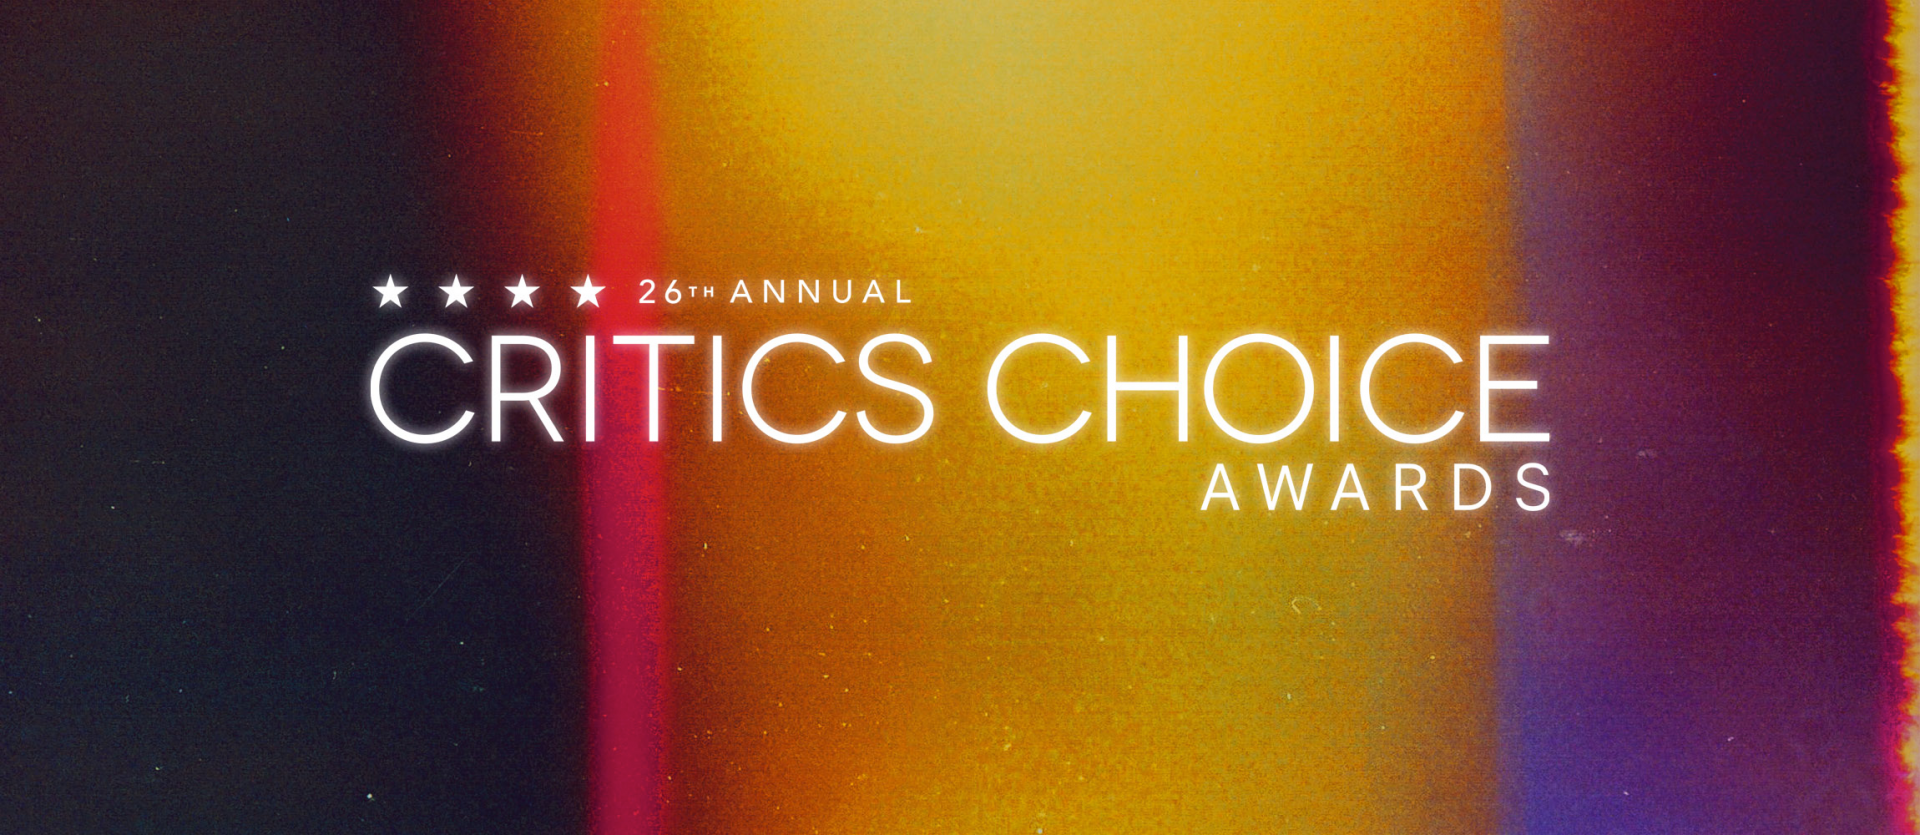 Full List of Winners of The Critics Choice Awards 2021: 'Nomadland' among top honourees